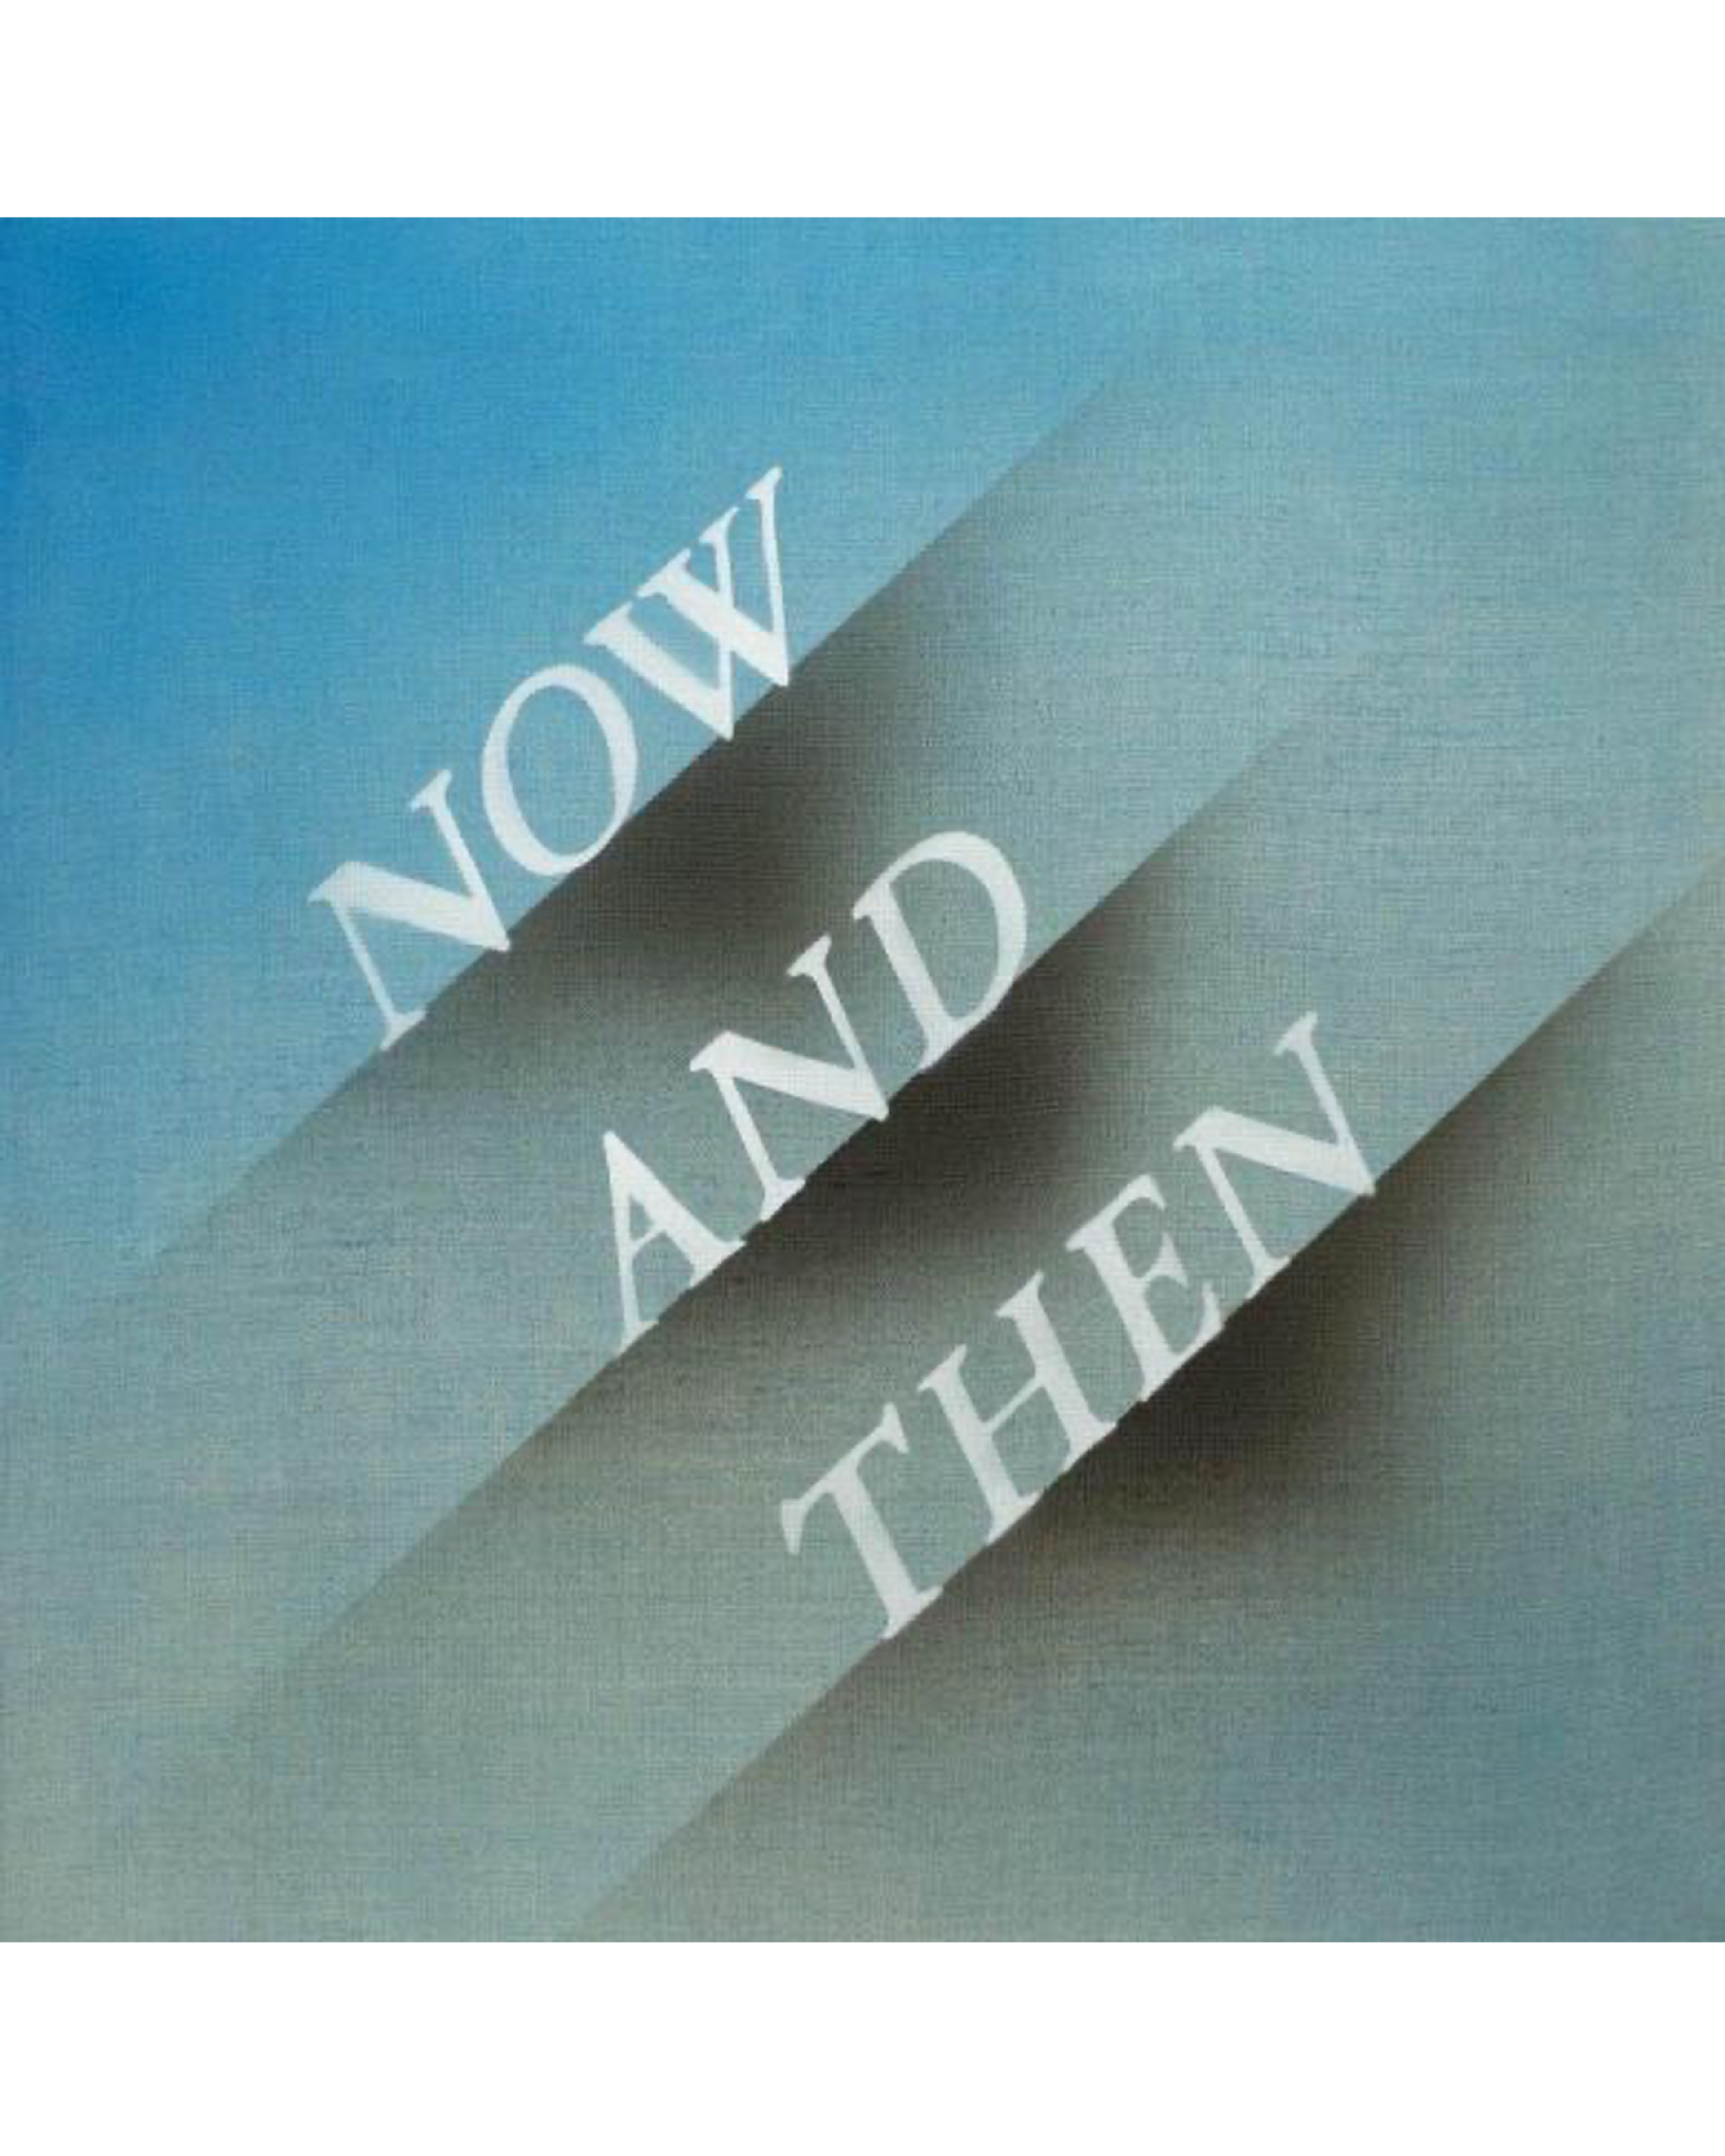 'Now And Then', the final Beatles song single cover by Ed Ruscha